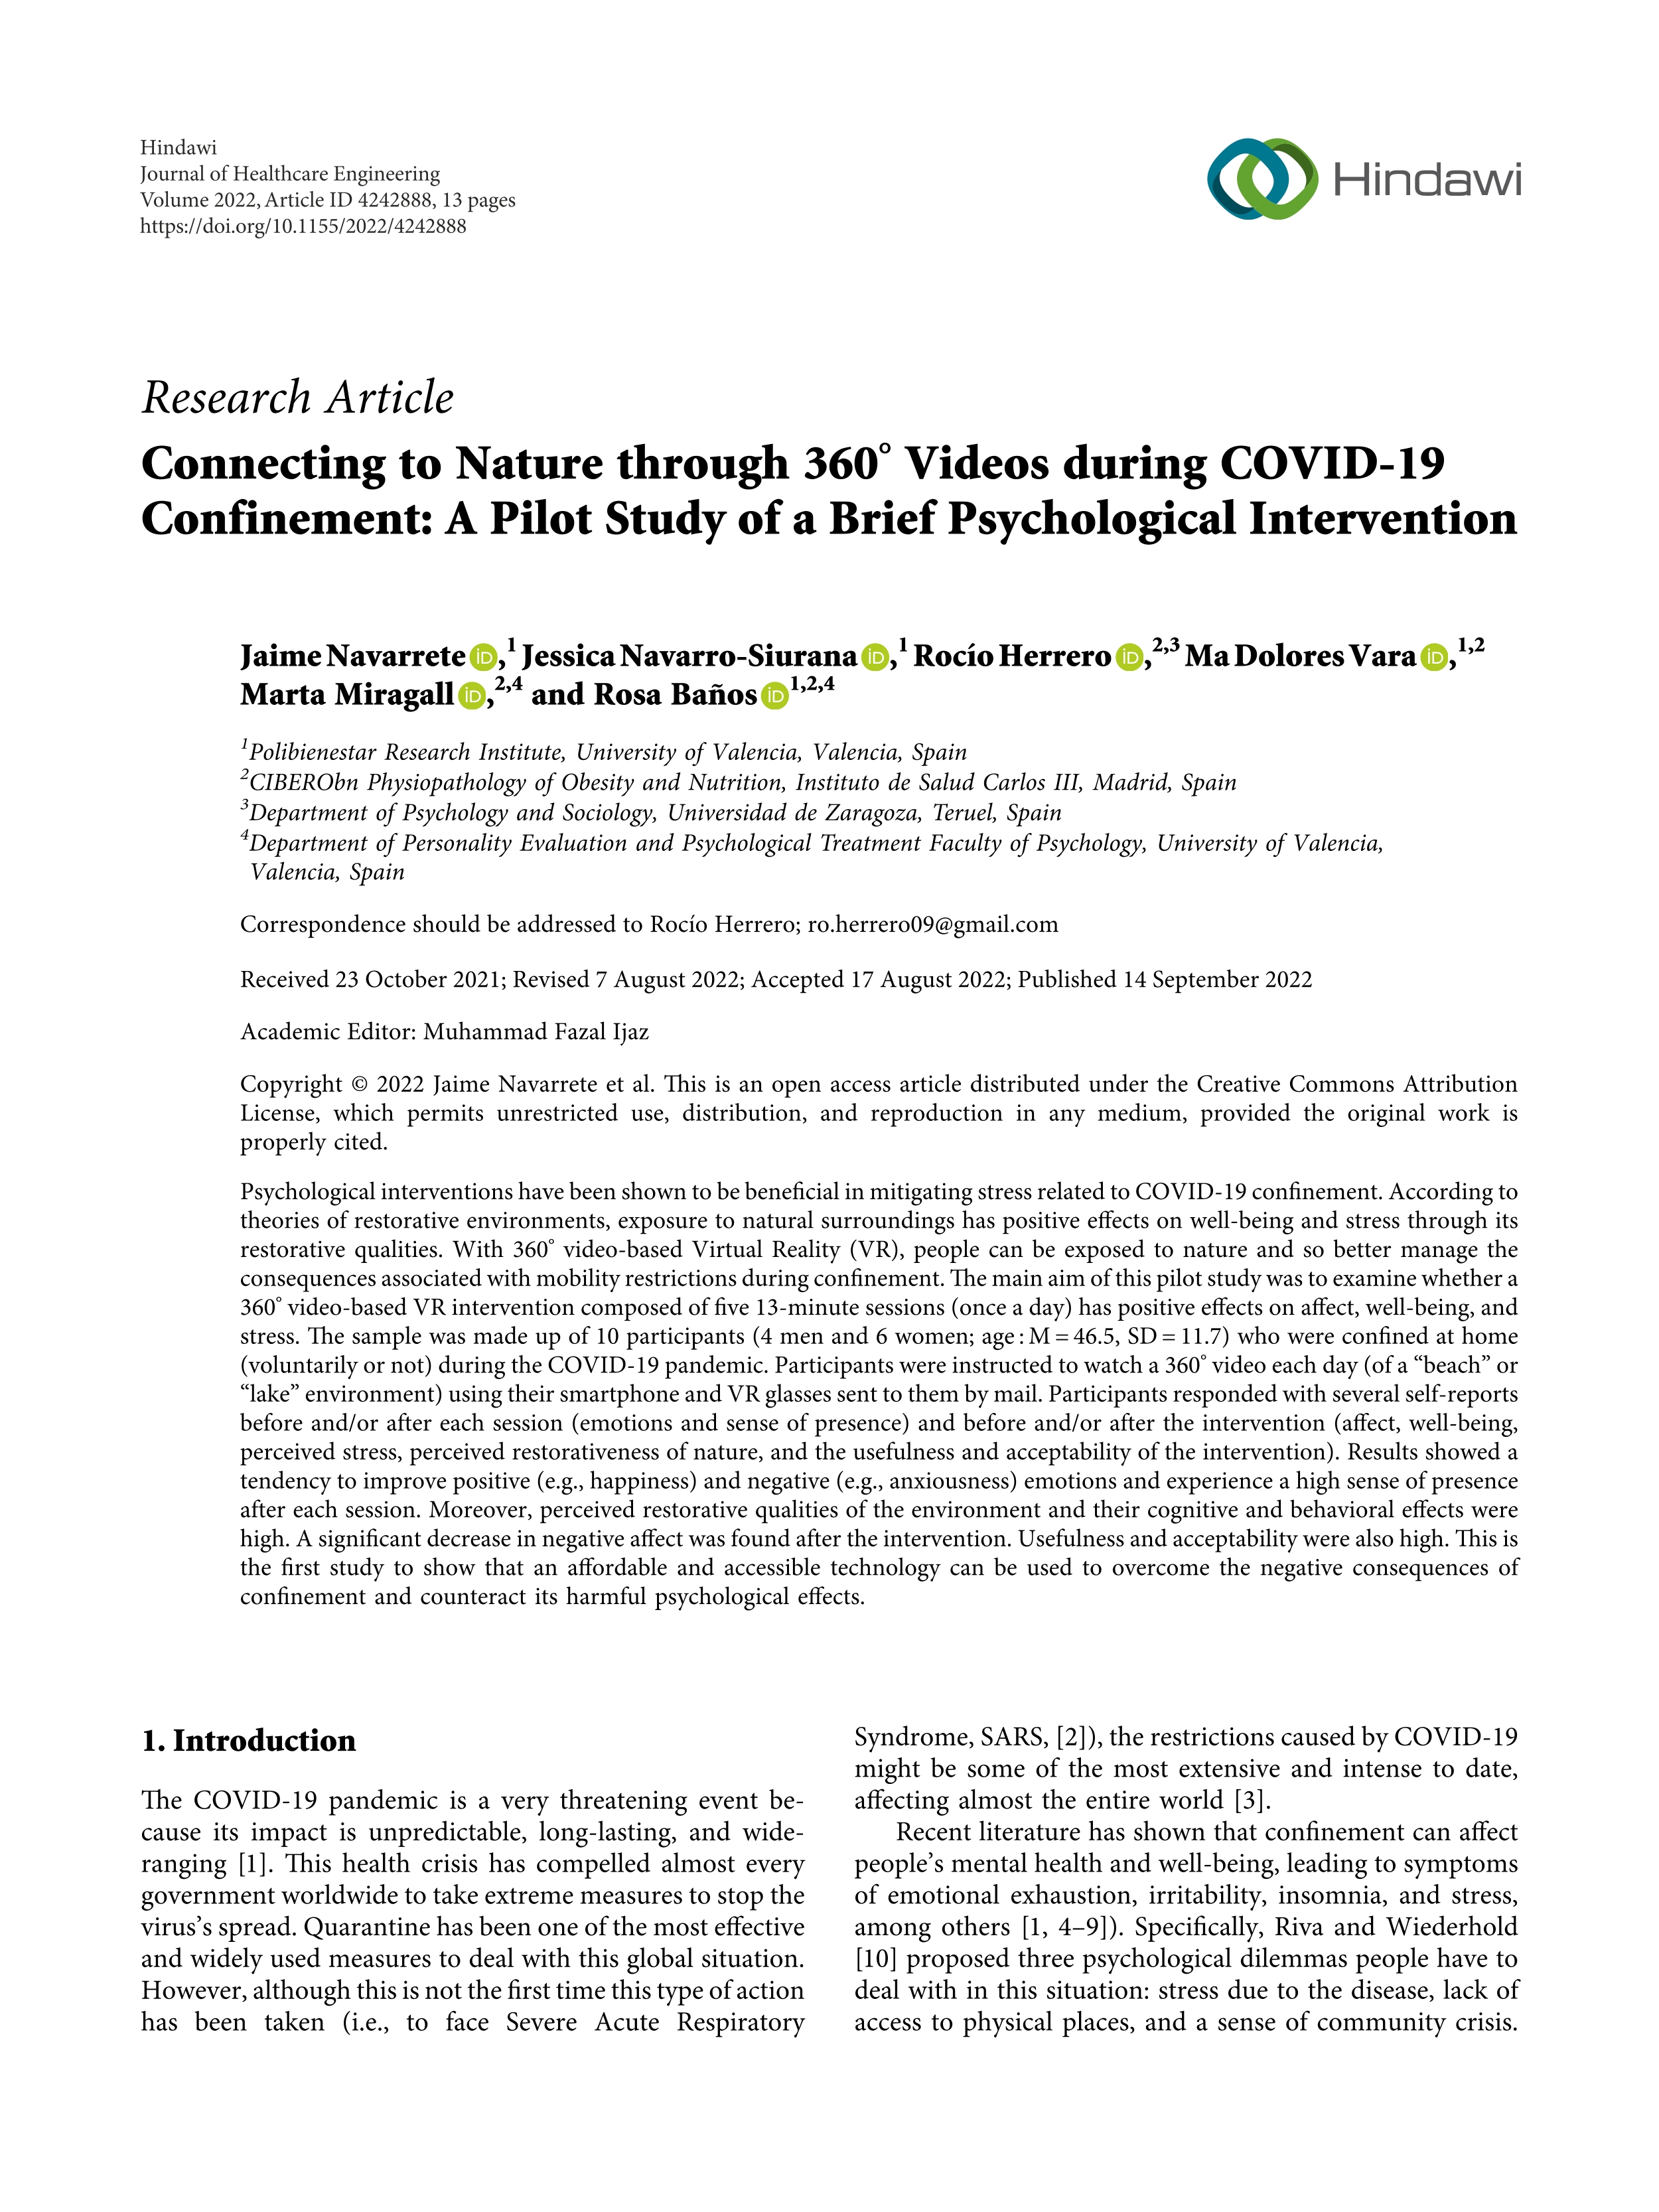 Connecting to nature through 360° videos during COVID-19 confinement: a pilot study of a brief psychological intervention